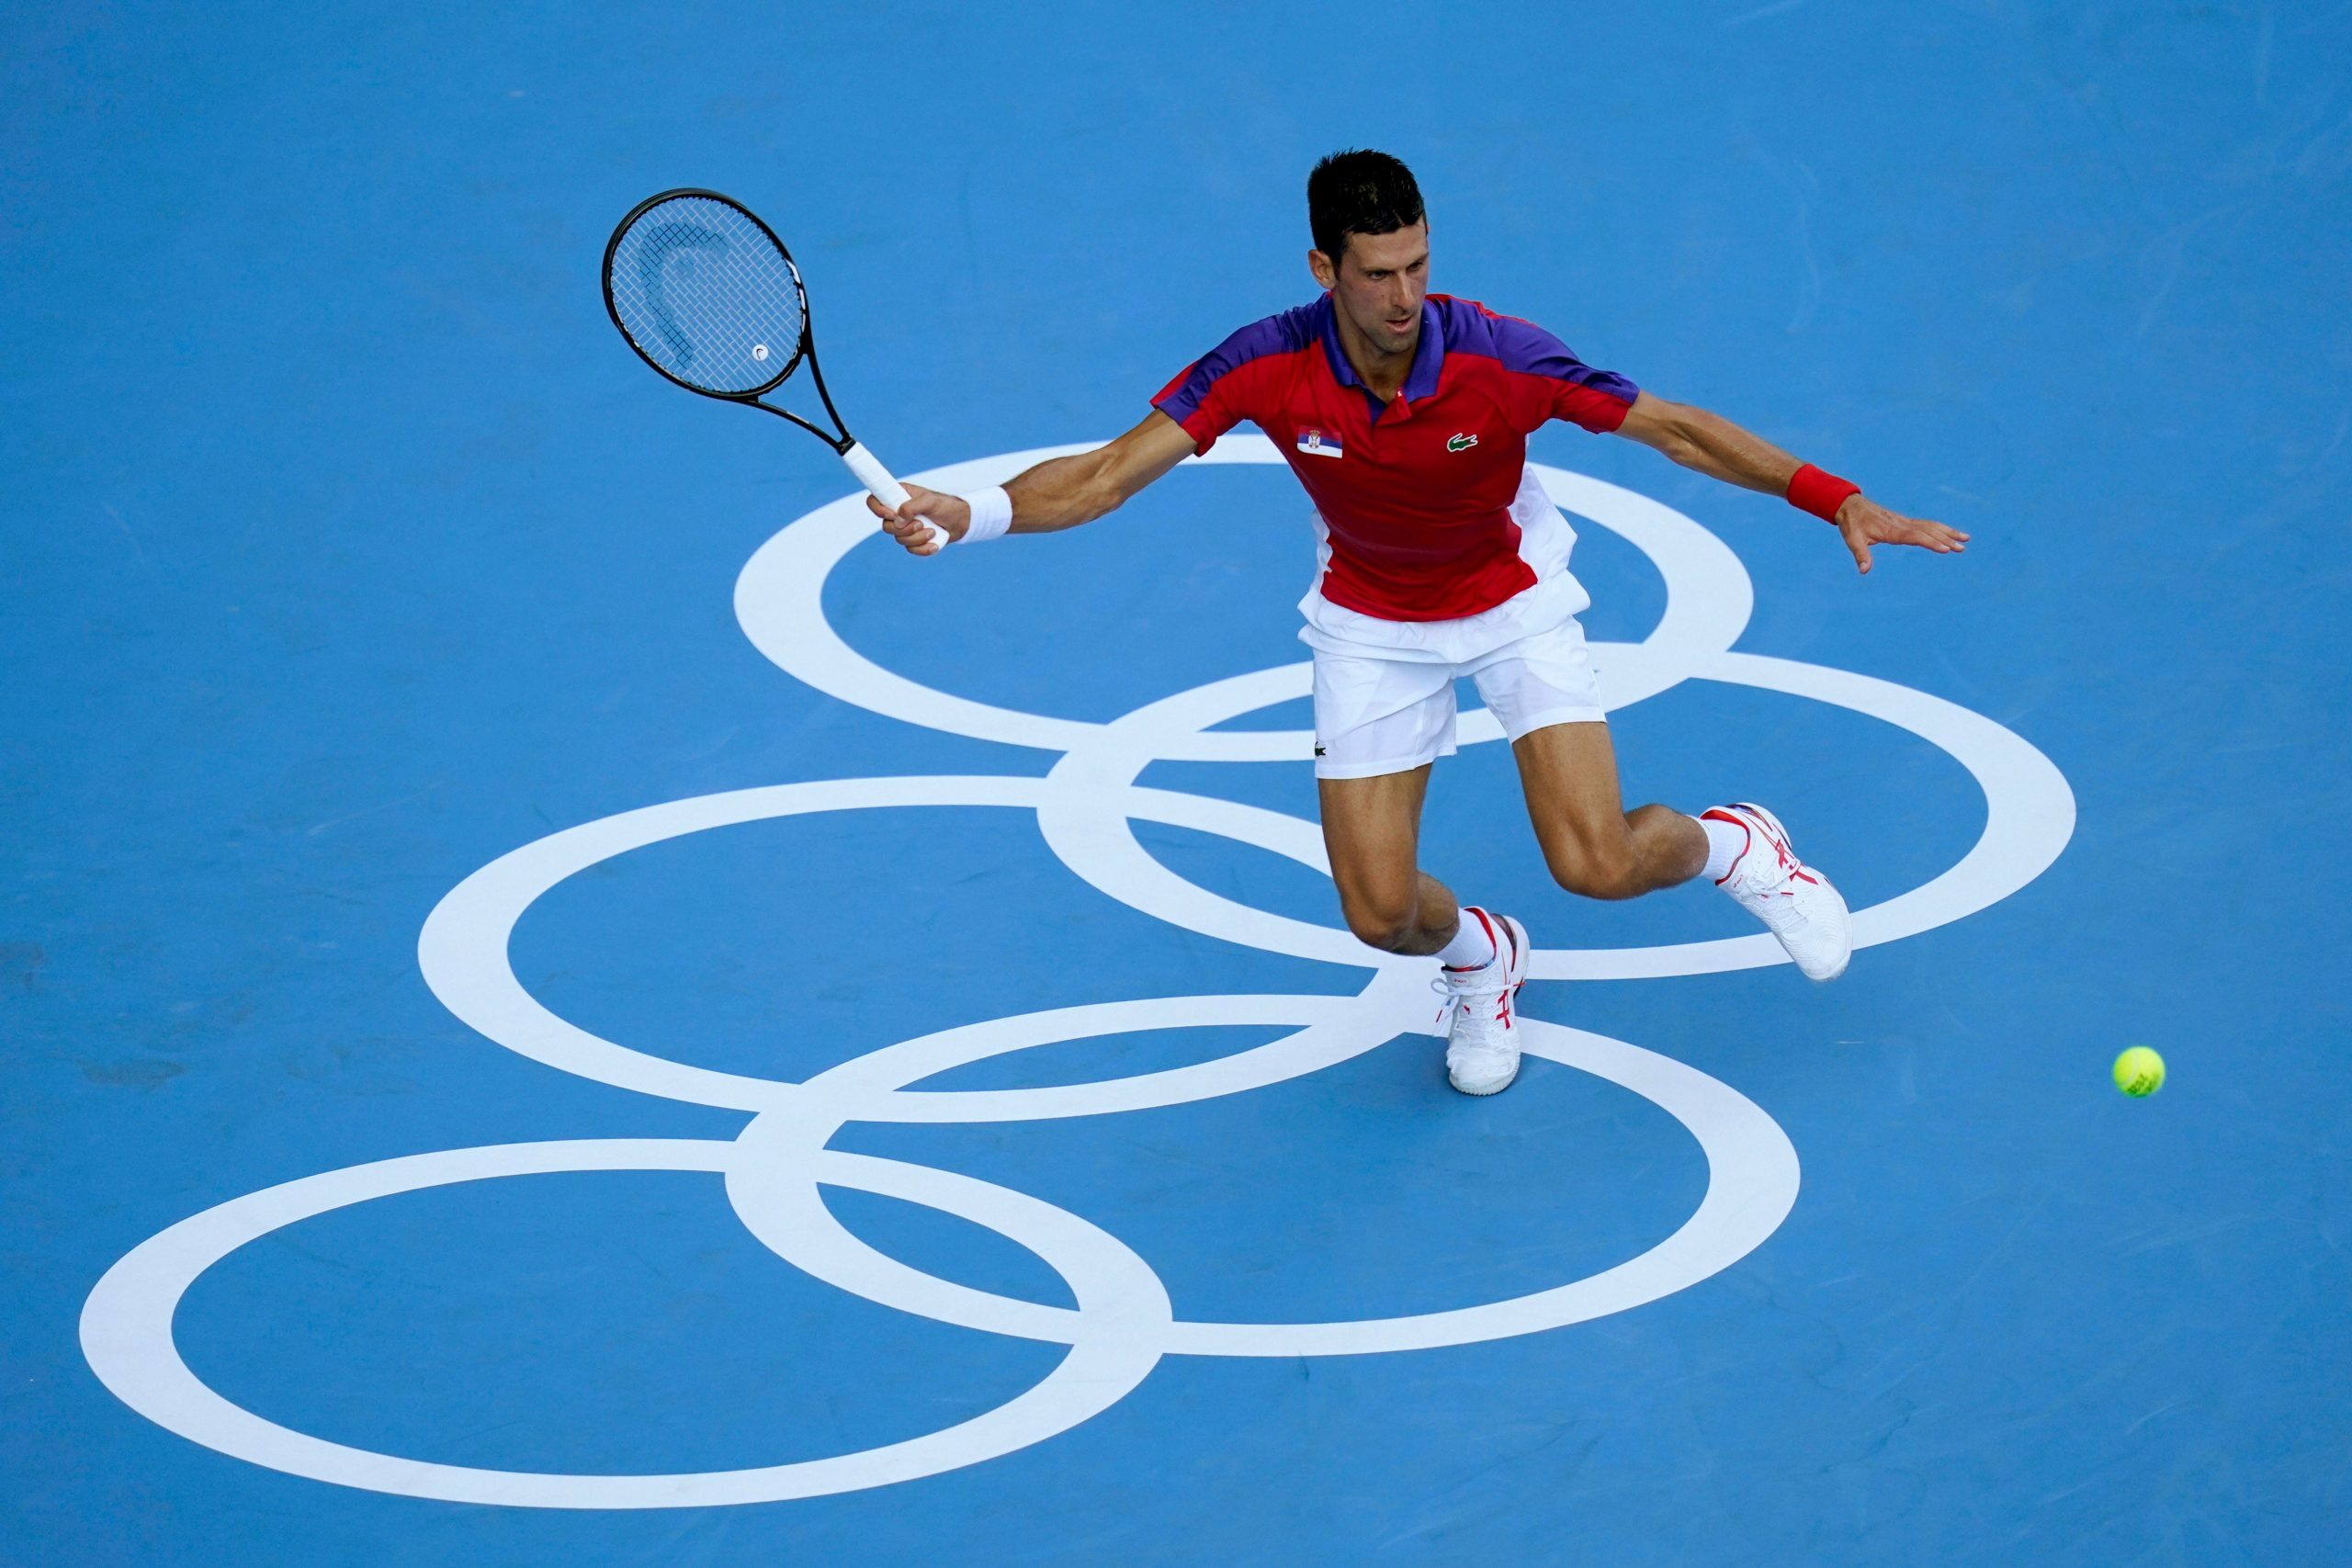 Novak Djokovic’s Olympic campaign ends, fails to win medal at Tokyo Games